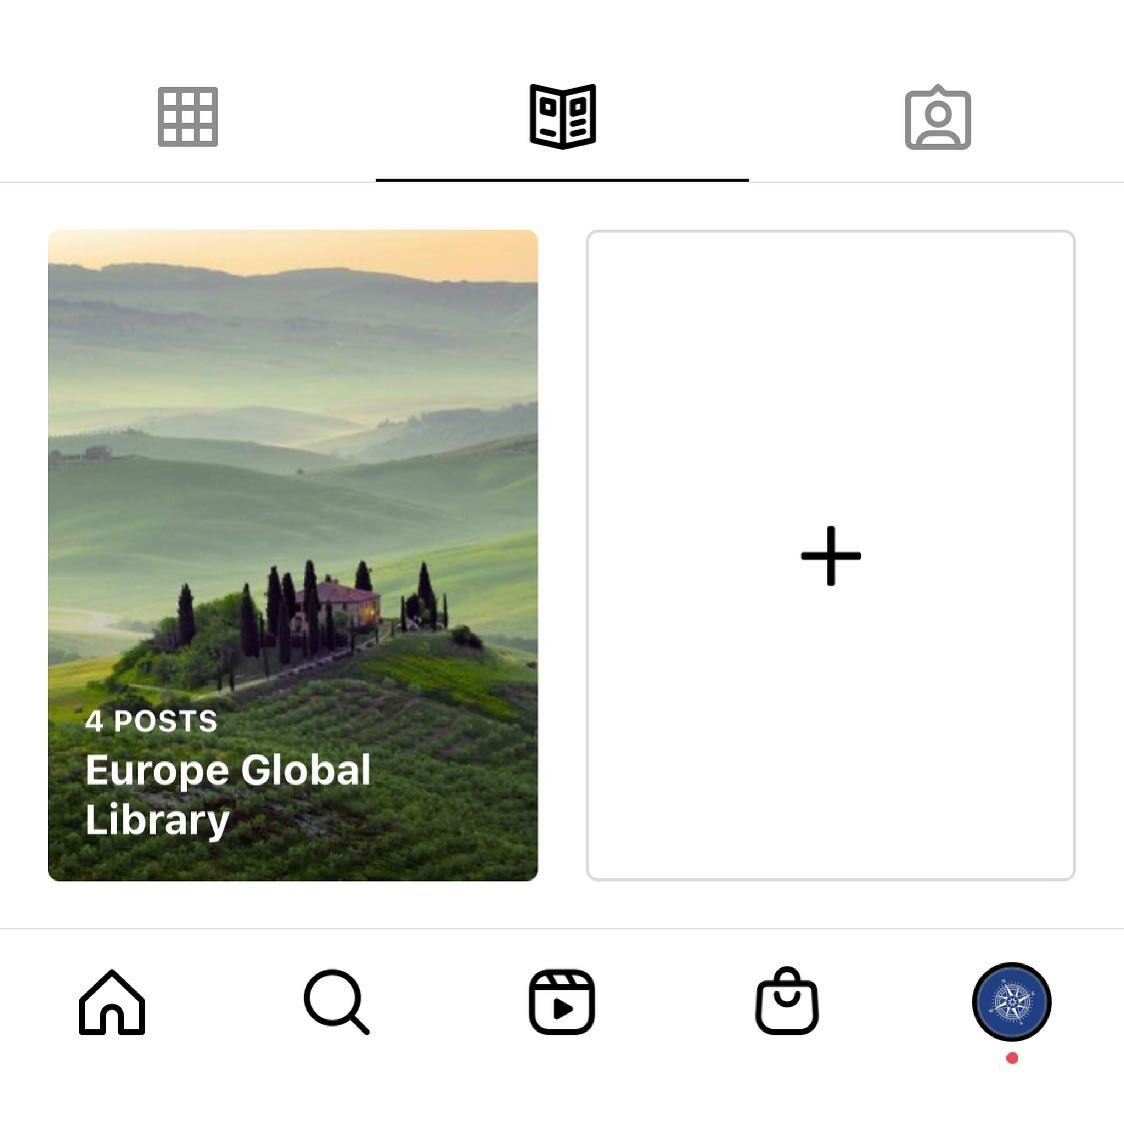 GUIDES: We&rsquo;ve added our first guide to our Instagram feed. Check out the tab and follow along as we add more of our travel tips and tricks, as well as our go-to partners and hoteliers.